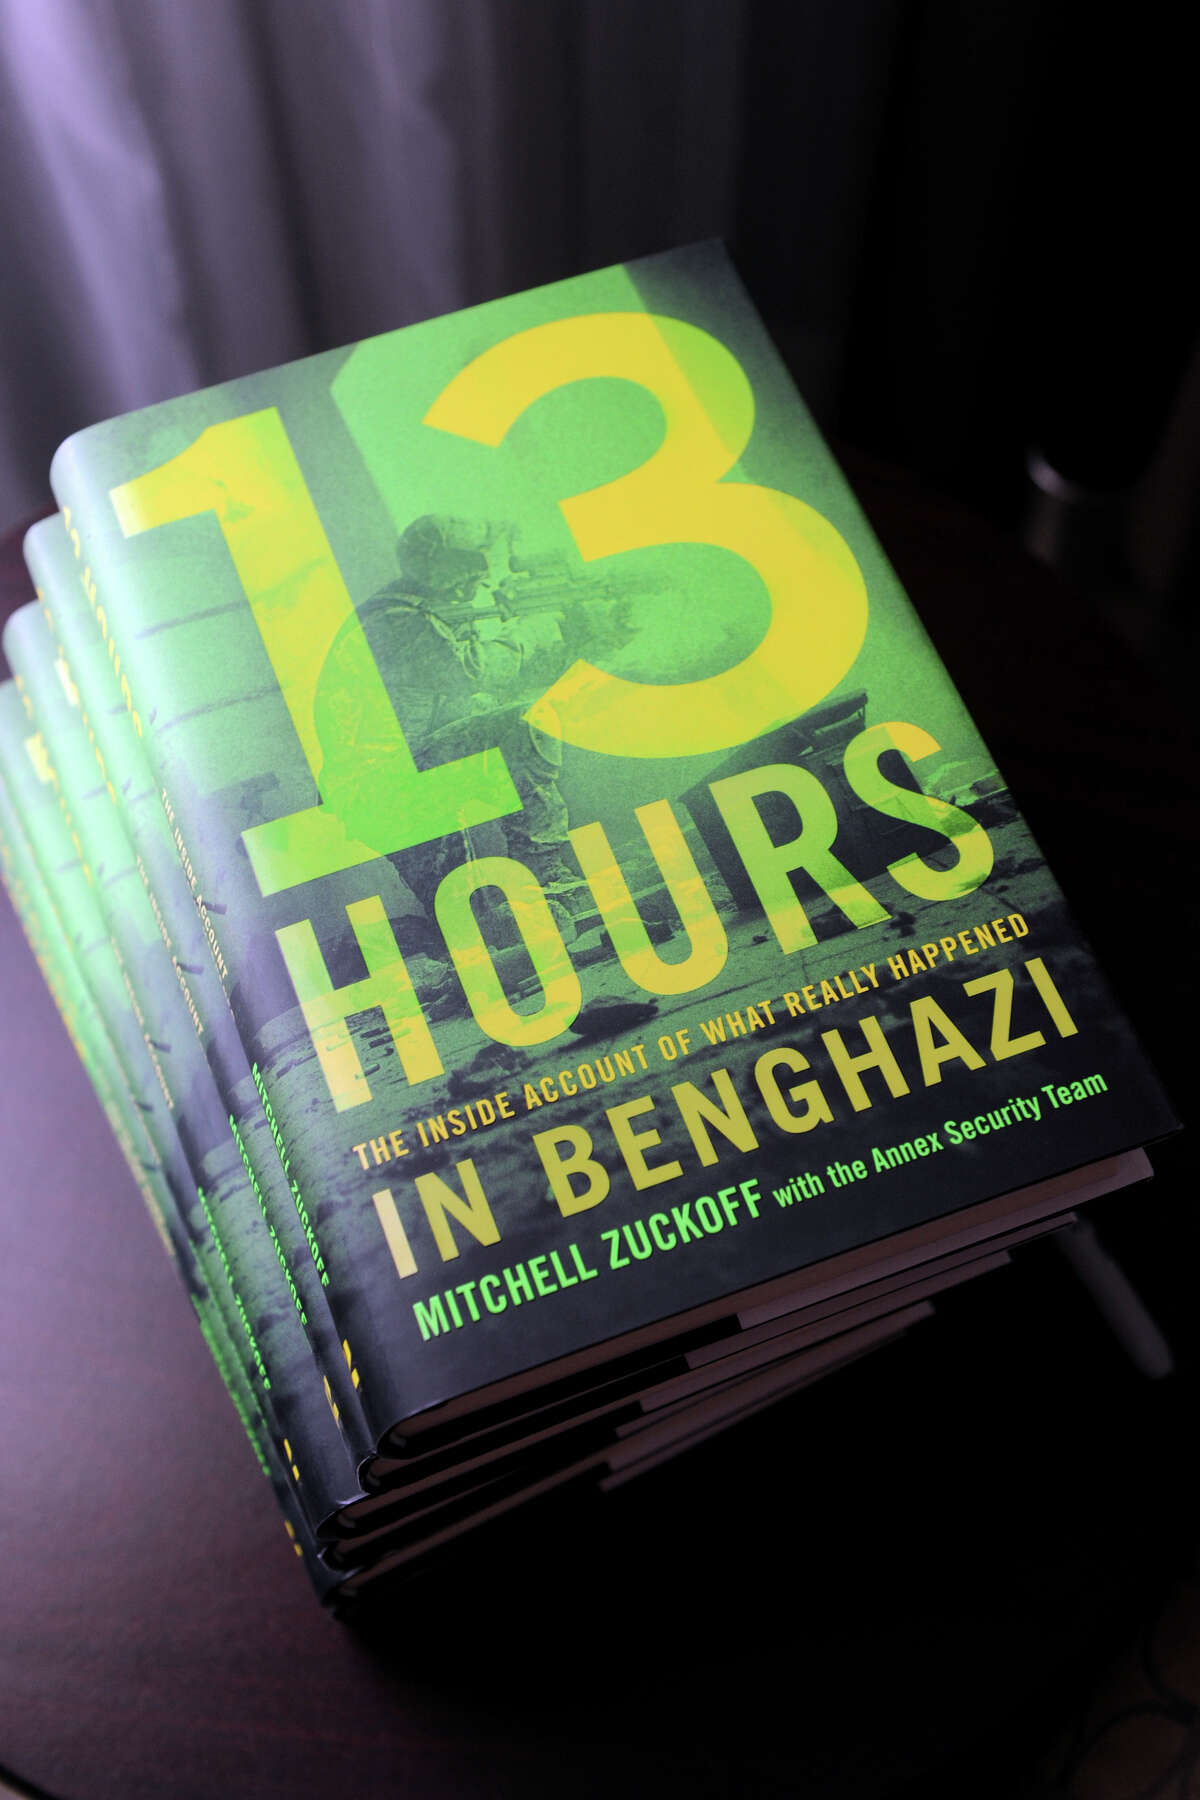 Kris "Tonto" Paronto, a military contractor and former Army Ranger who survived the 2012 terrorist siege in Benghazi, is featured in a book by Michell Zuckoff. Paronto spoke at the Republican's annual Lincoln Day Dinner in Bridgeport, Conn. on Thursday, May 26, 2016.